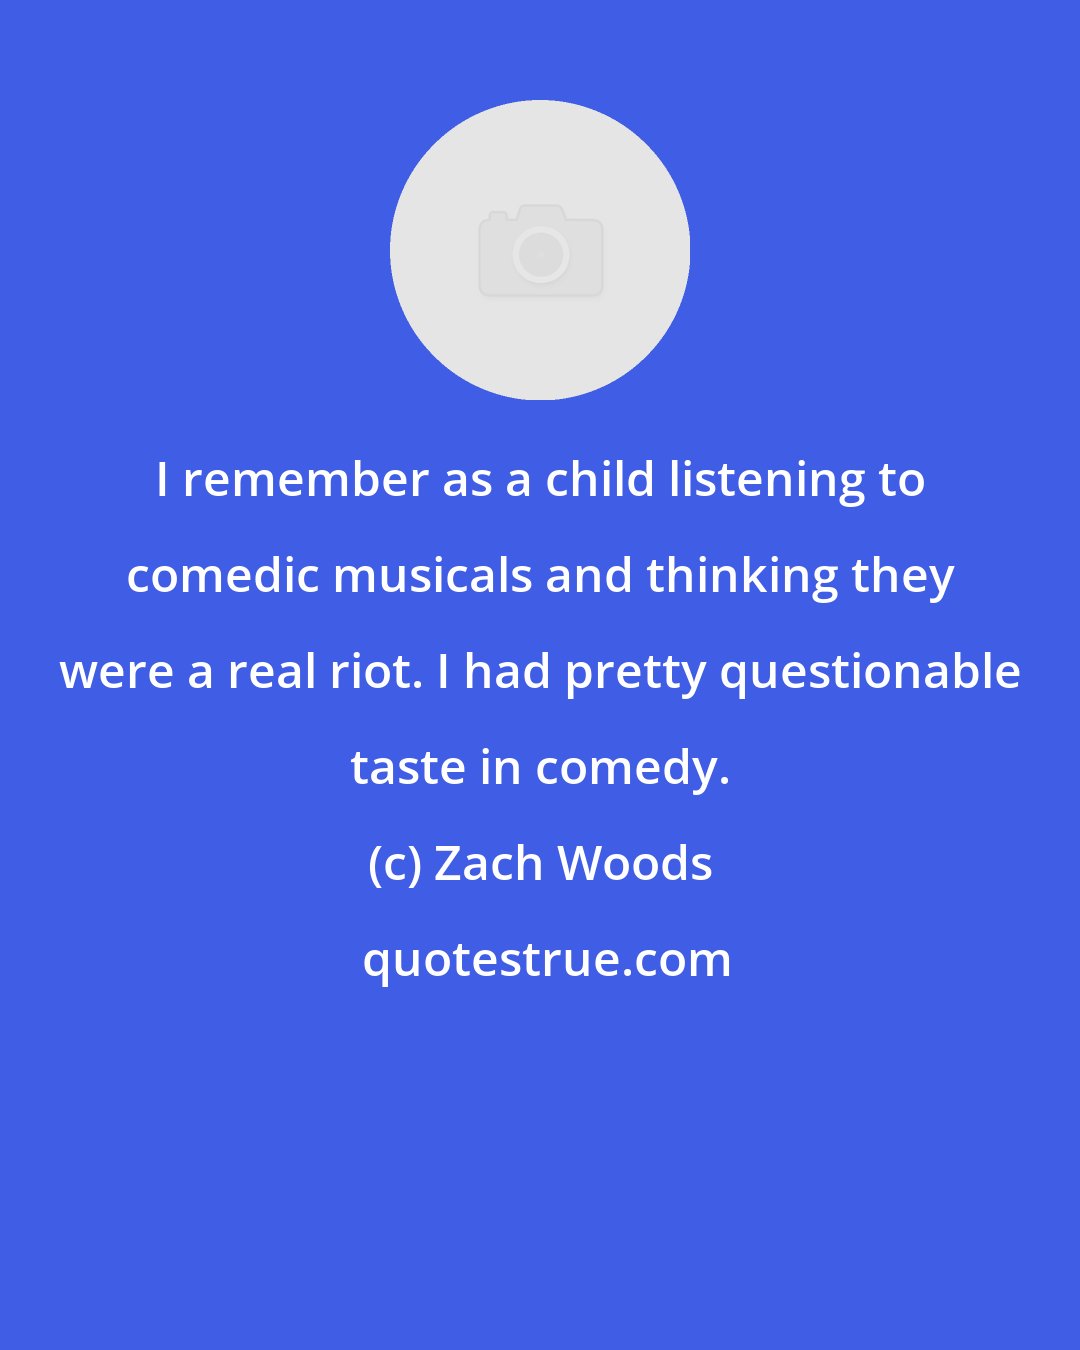 Zach Woods: I remember as a child listening to comedic musicals and thinking they were a real riot. I had pretty questionable taste in comedy.